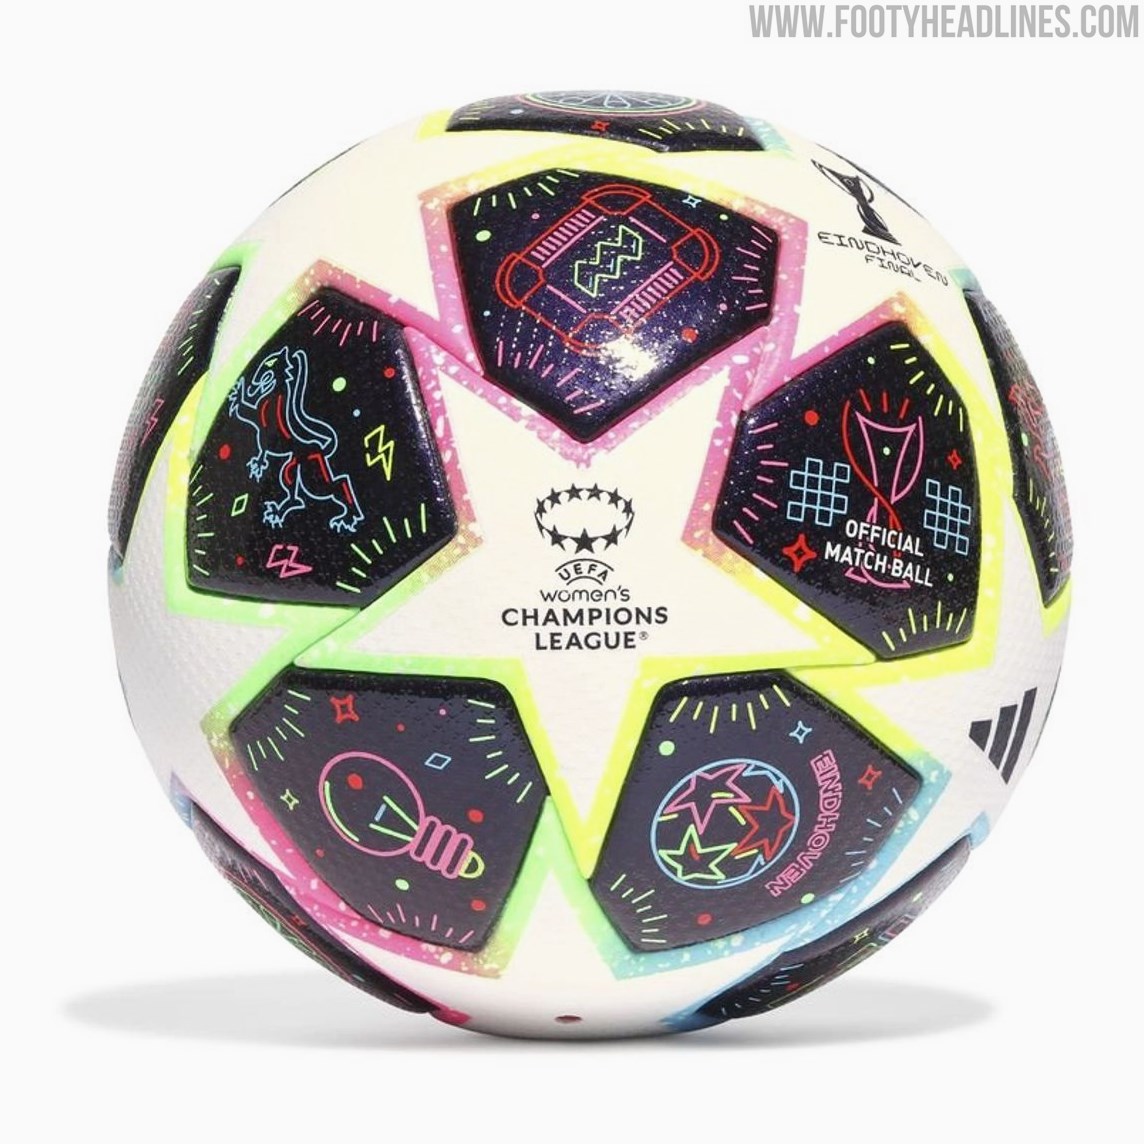 Adidas 2023 UEFA Champions League Final Ball Released - Footy